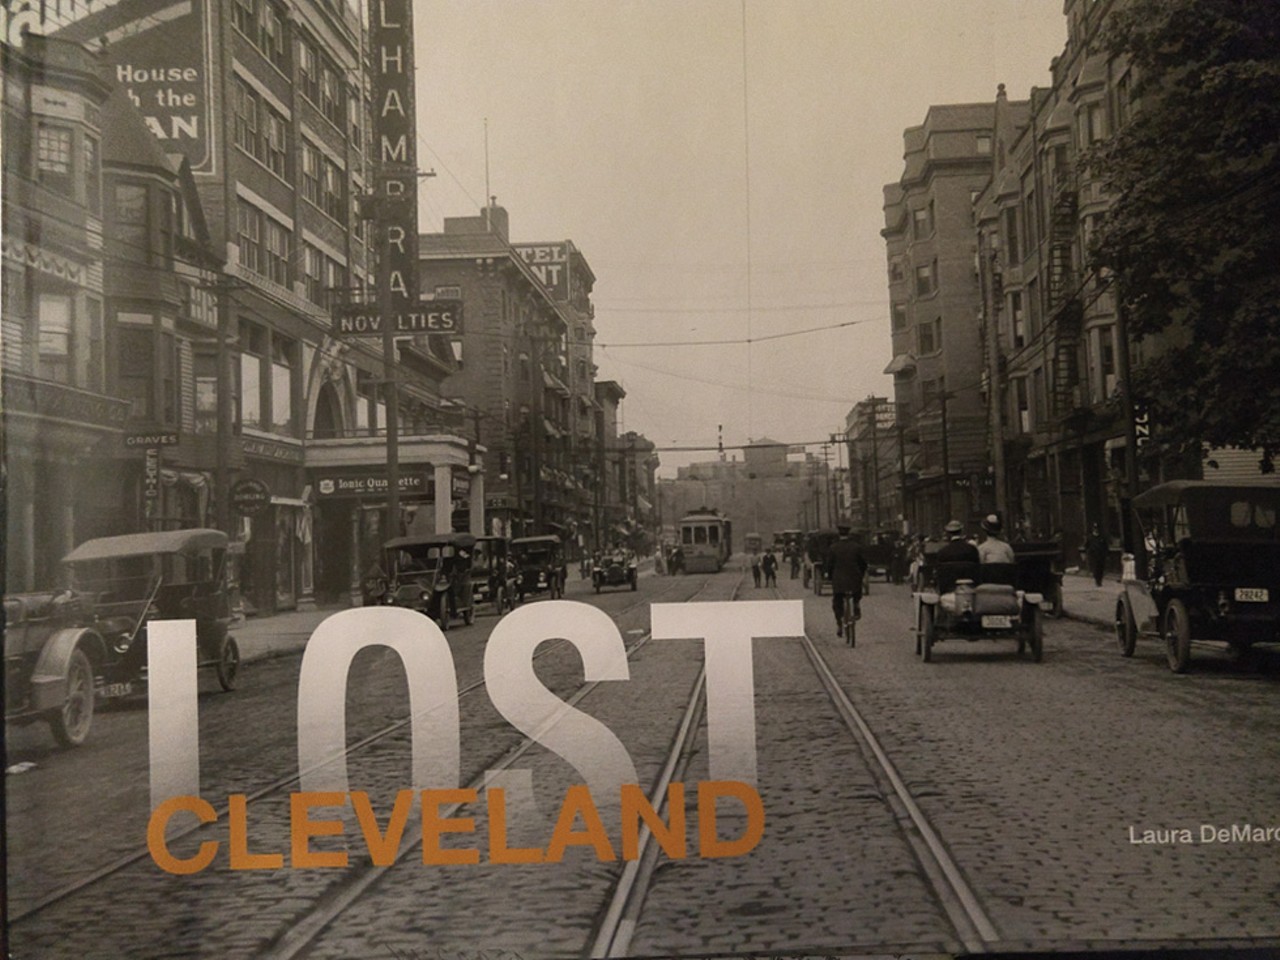 A Copy of Lost Cleveland
Organized chronologically,&nbsp;Lost Cleveland, a new coffee table book featuring photos of old Cleveland institutions that no longer exist, includes photos from places such as Leo&#146;s Casino, the Hippodrome, Hough Bakery, Cleveland Municipal Stadium and Memphis Drive-In.&nbsp;Plain Dealer&nbsp;reporter Laura DeMarco did the painstaking research and wrote the copy that accompanies the vintage photos.&nbsp;The coffee table book chronicles the &#147;iconic architecture, legendary events, and fascinating true tales behind a city that was one of the largest and most prosperous in America.&#148;&nbsp;With 65 entries and more than 200 photos, the 144-page&nbsp;hardcover book is a nostalgic blast from the past and perfect for the history nut in your life.